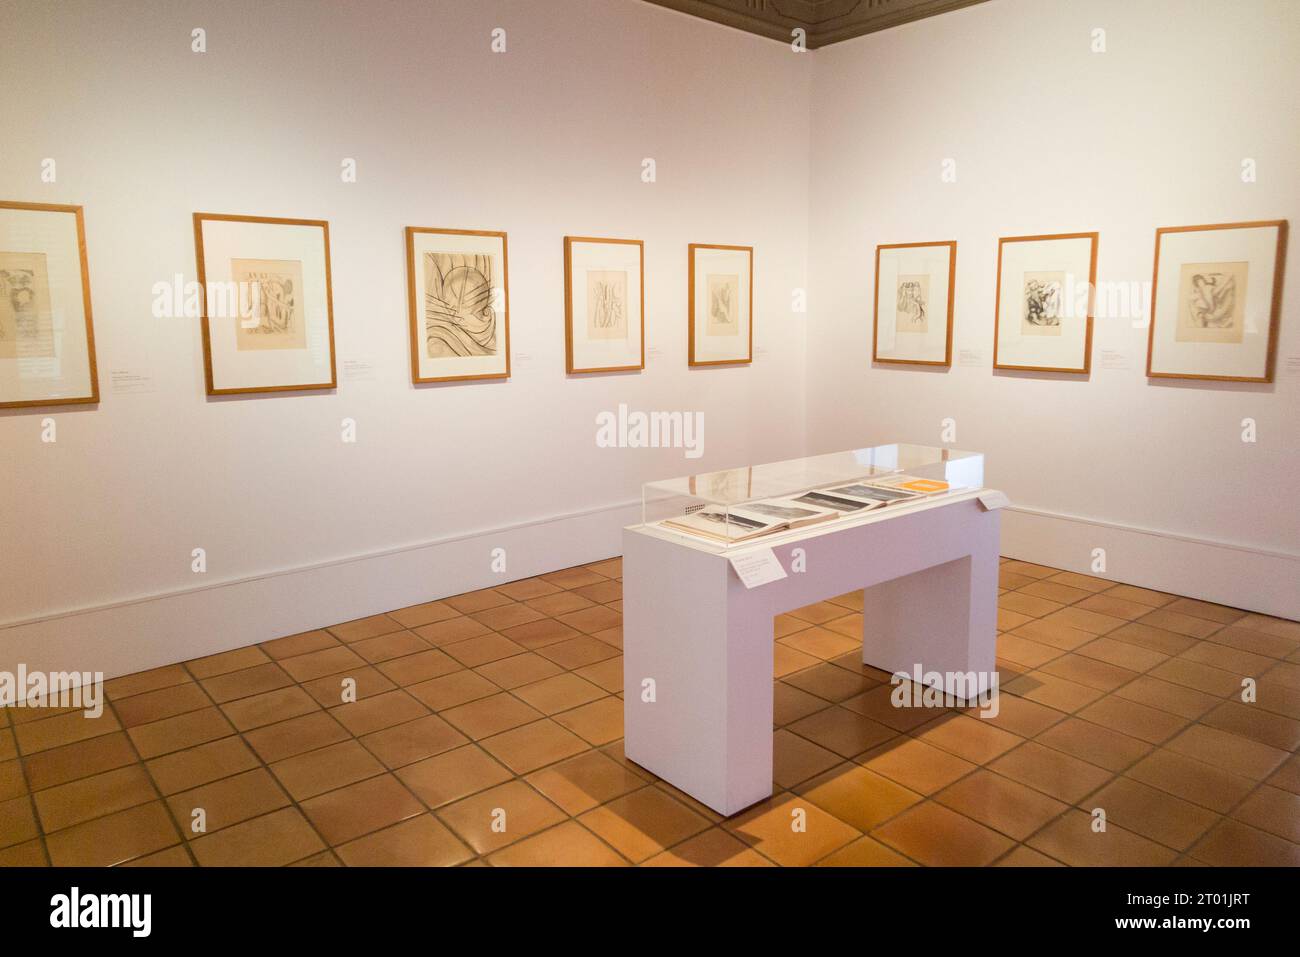 Room featuring framed works, drawings, by artist Henri Matisse in the Musee Matisse gallery building in Nice, France. (135) Stock Photo